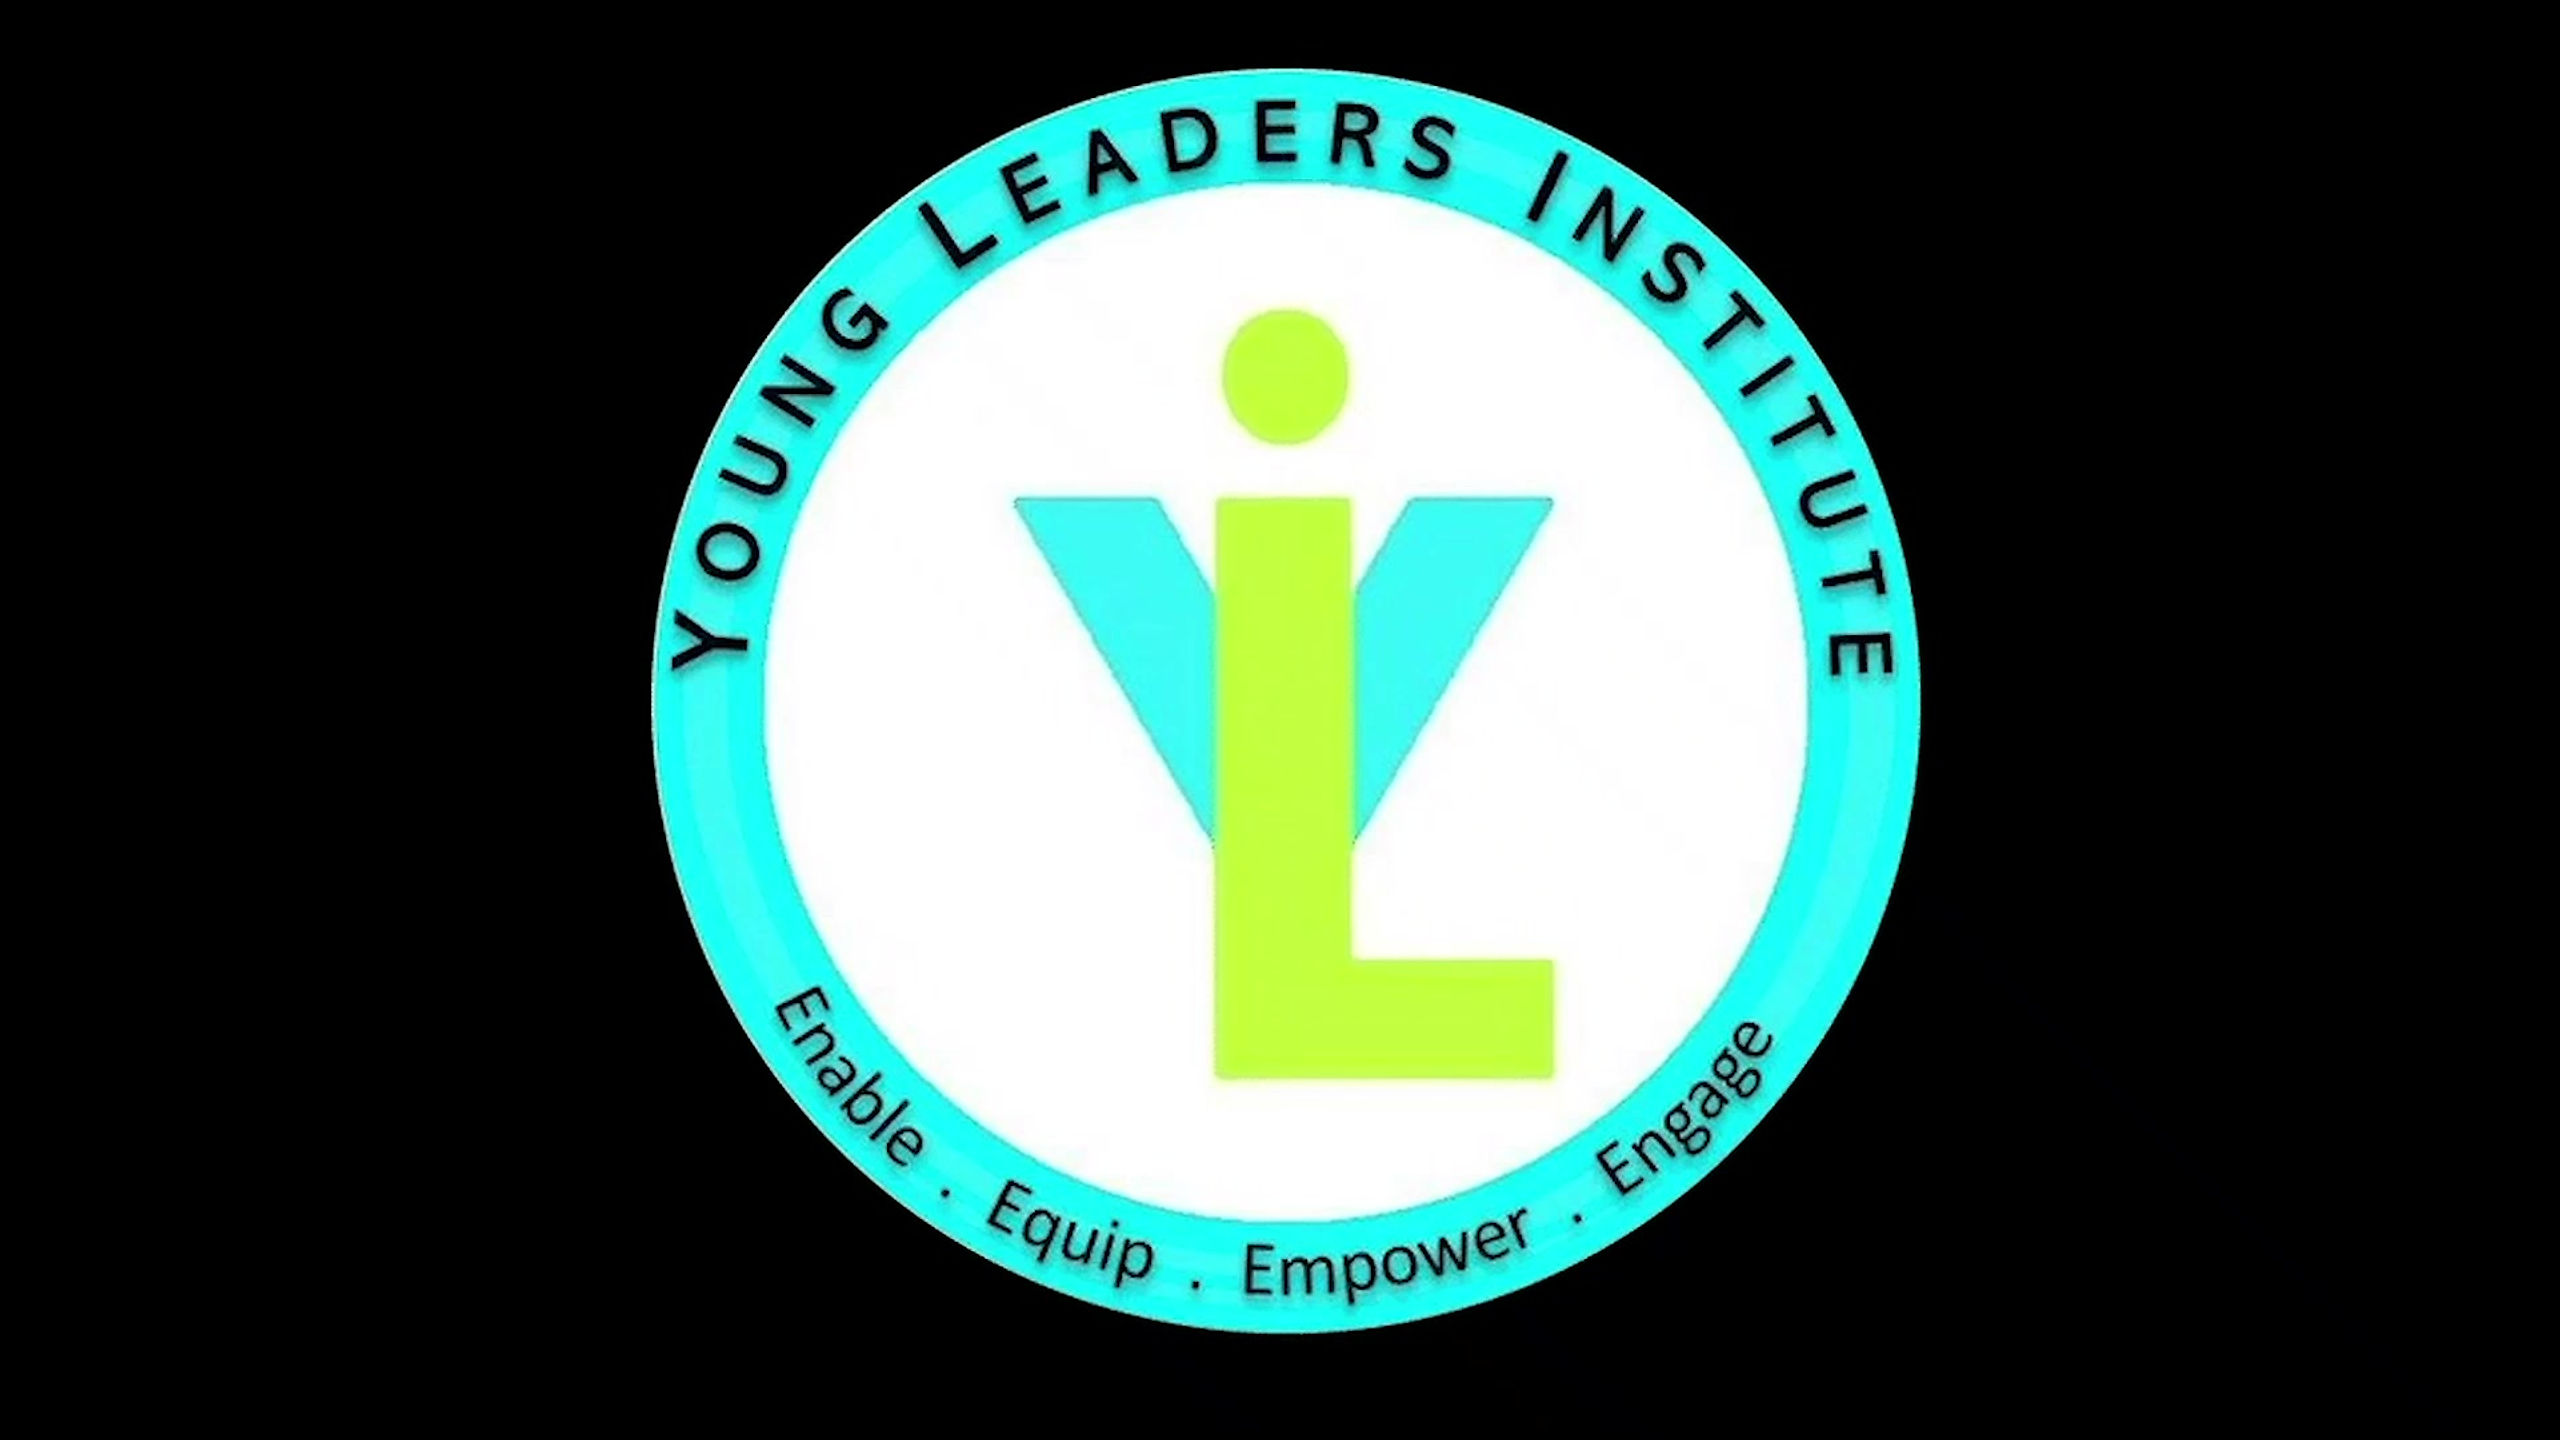 LEADING YOUTH TO GREATNESS